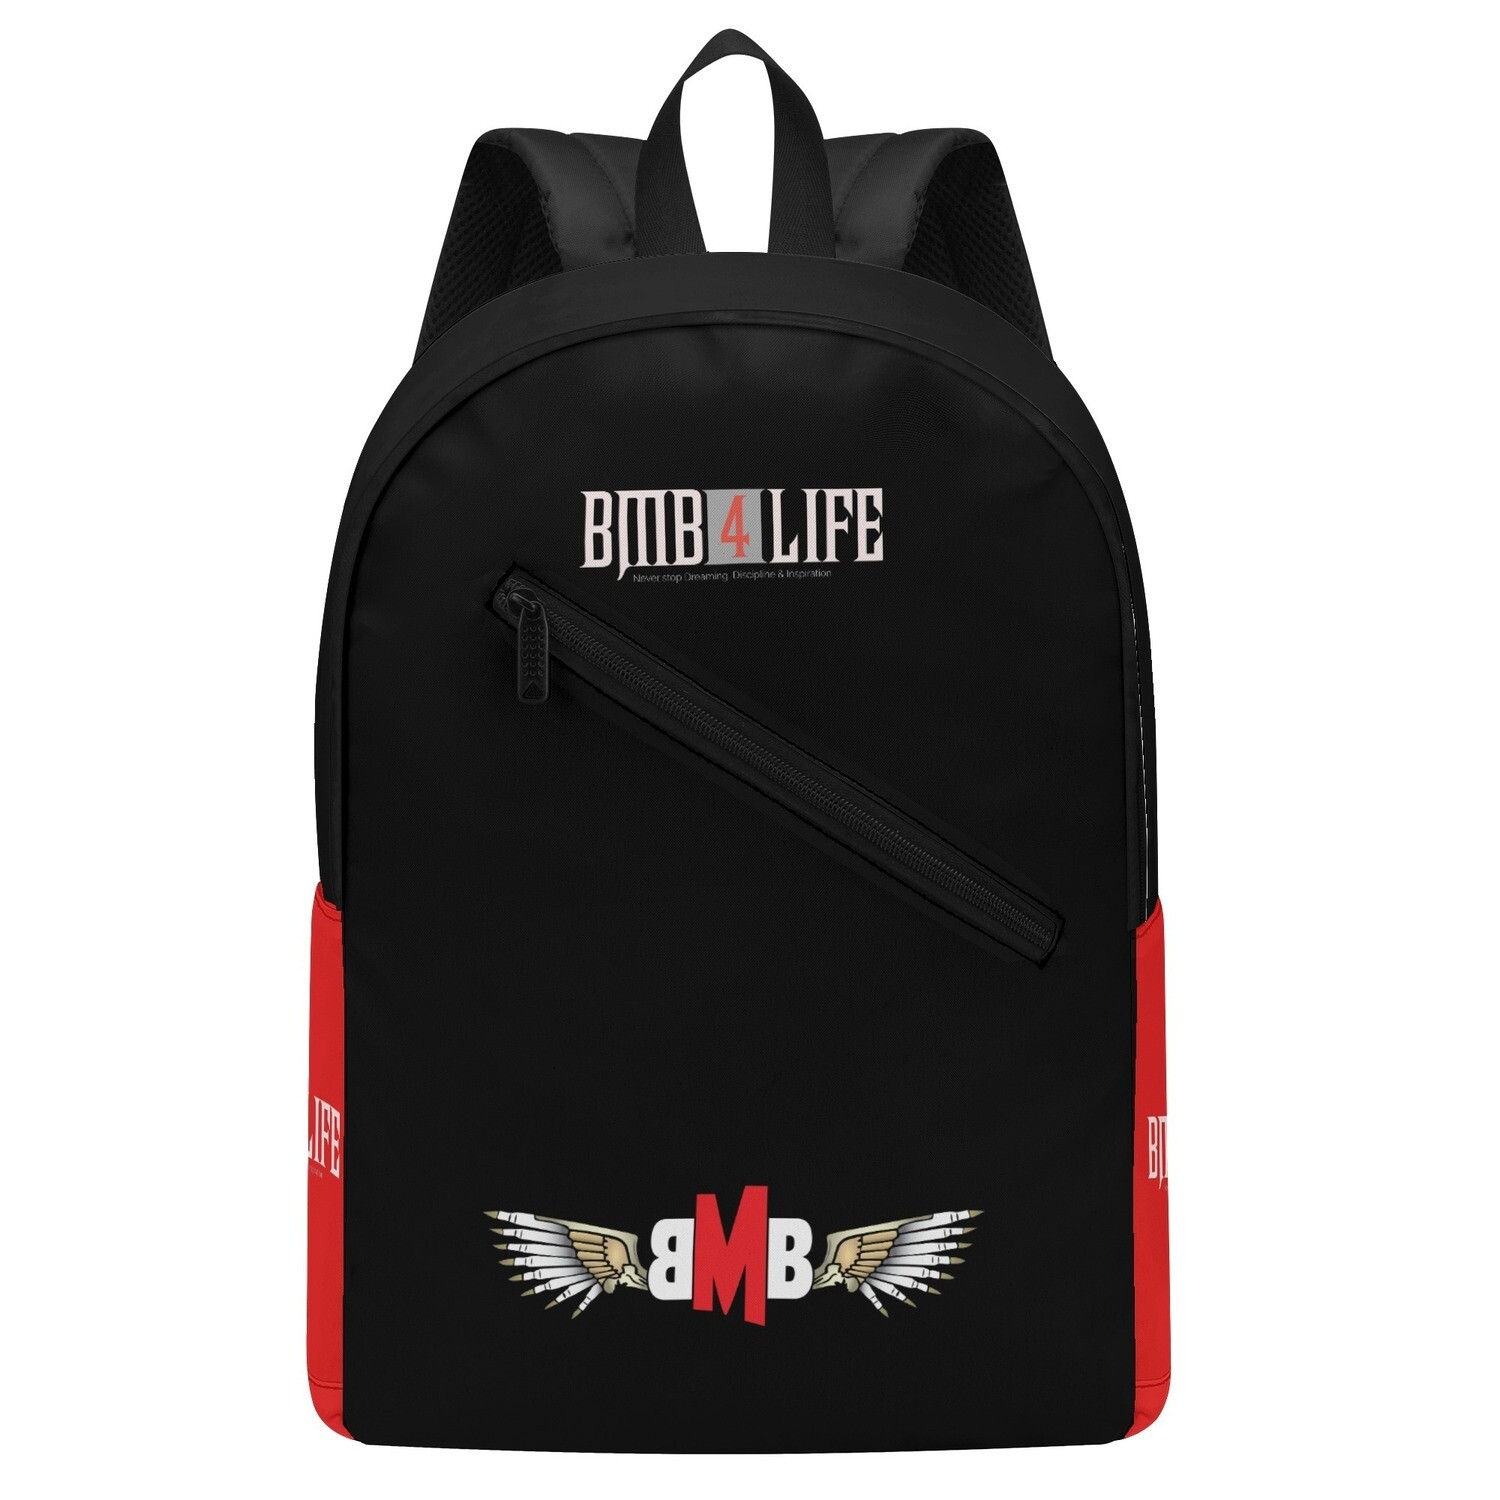 New BMB Laptop Backpack